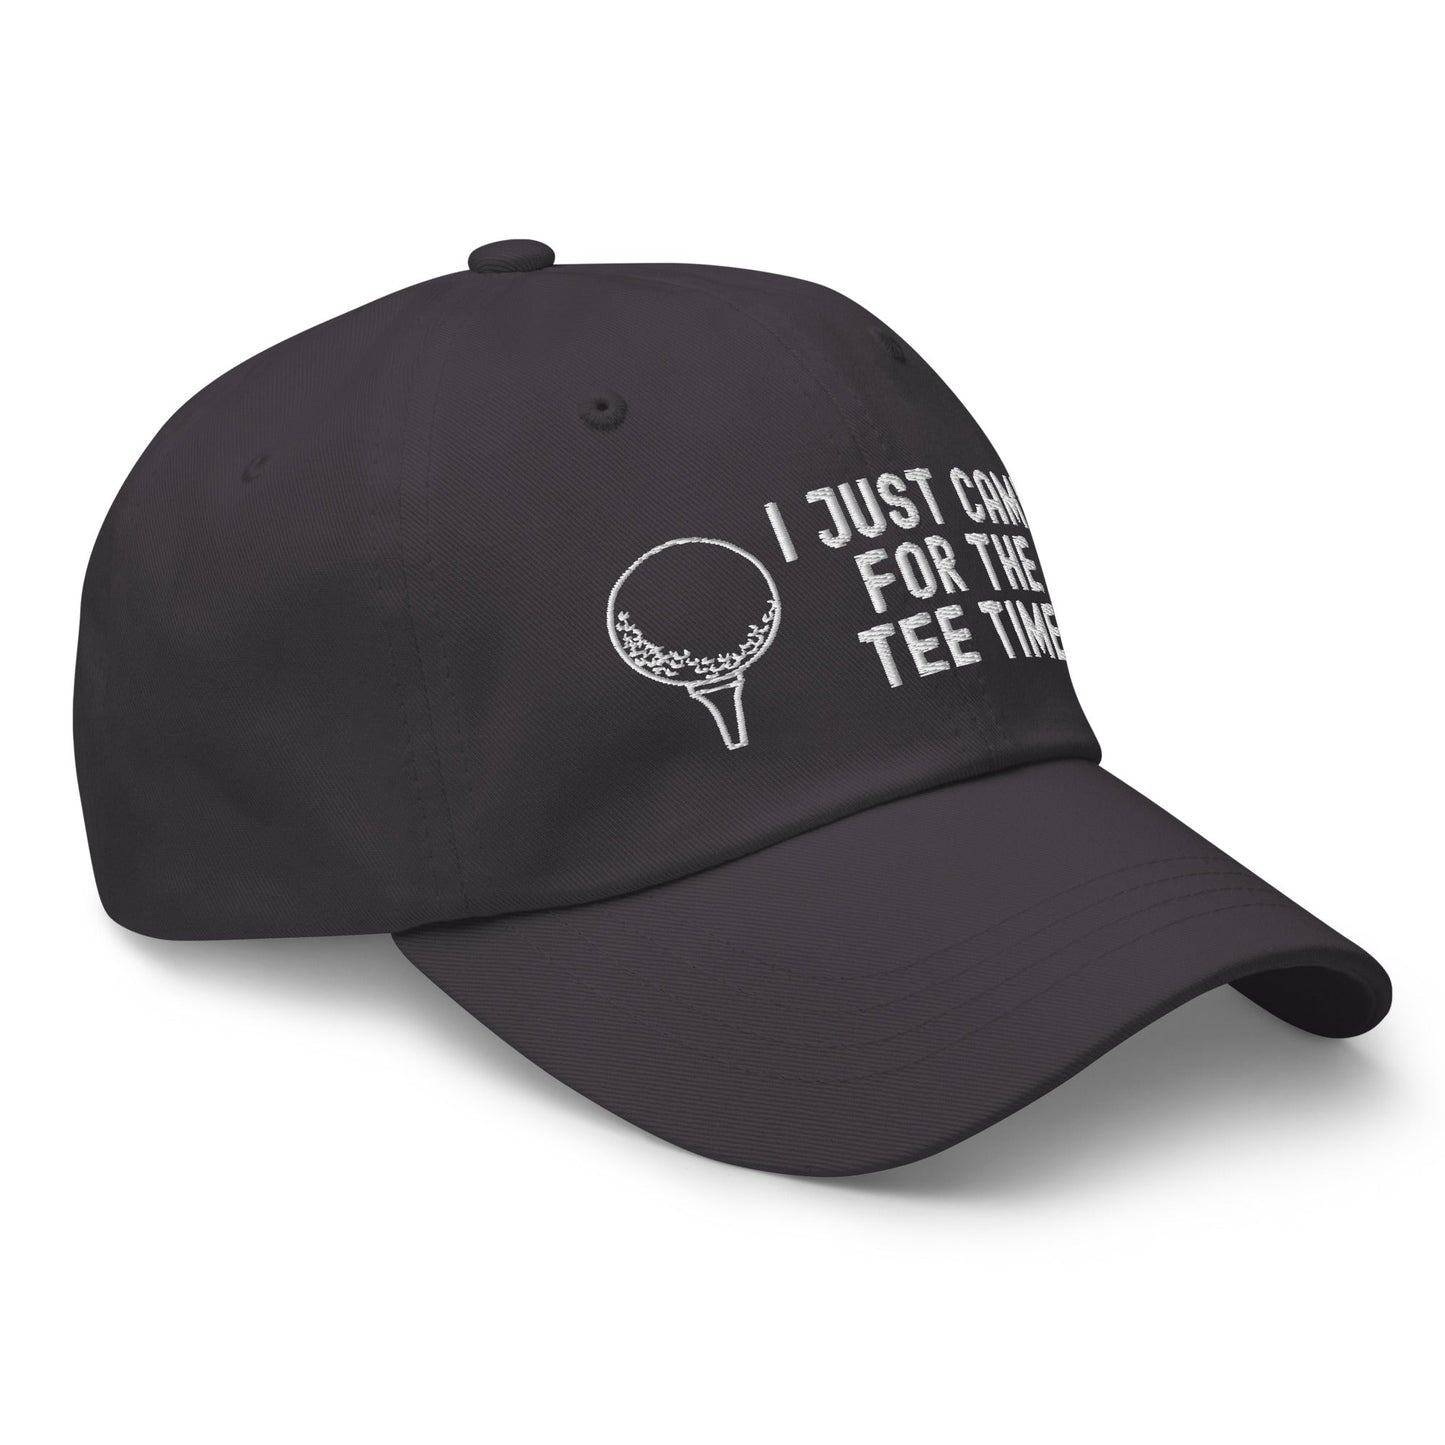 Funny Golfer Gifts  Dad Cap Dark Grey I Just Came For The Tee Times Cap